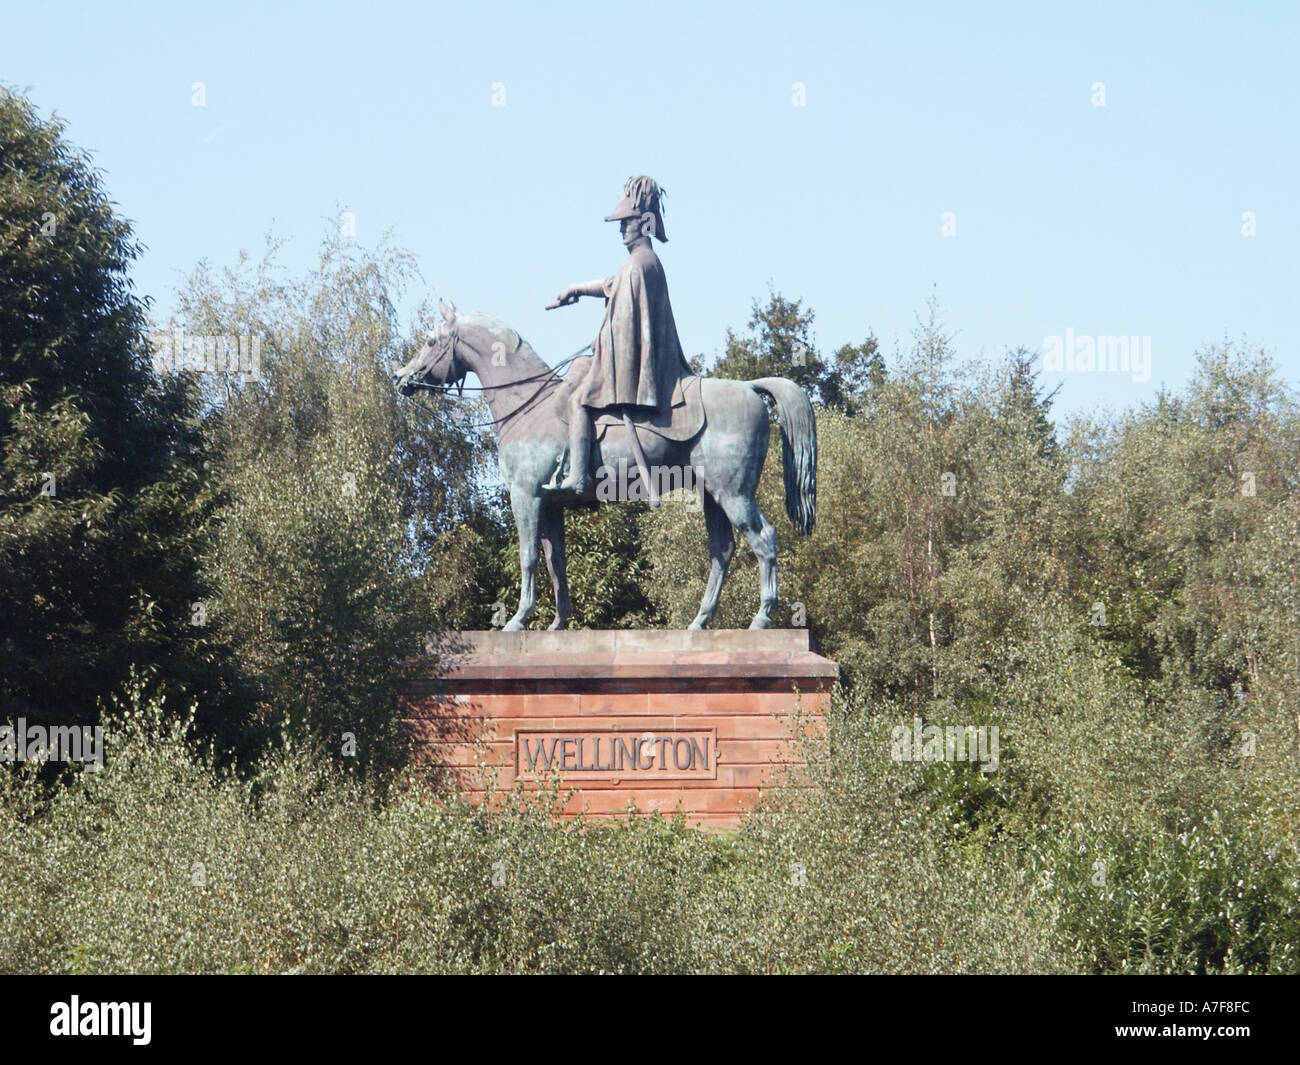 Aldershot a town with large army establishment Equestrian statue of Duke of Wellington in parkland Hampshire England UK Stock Photo